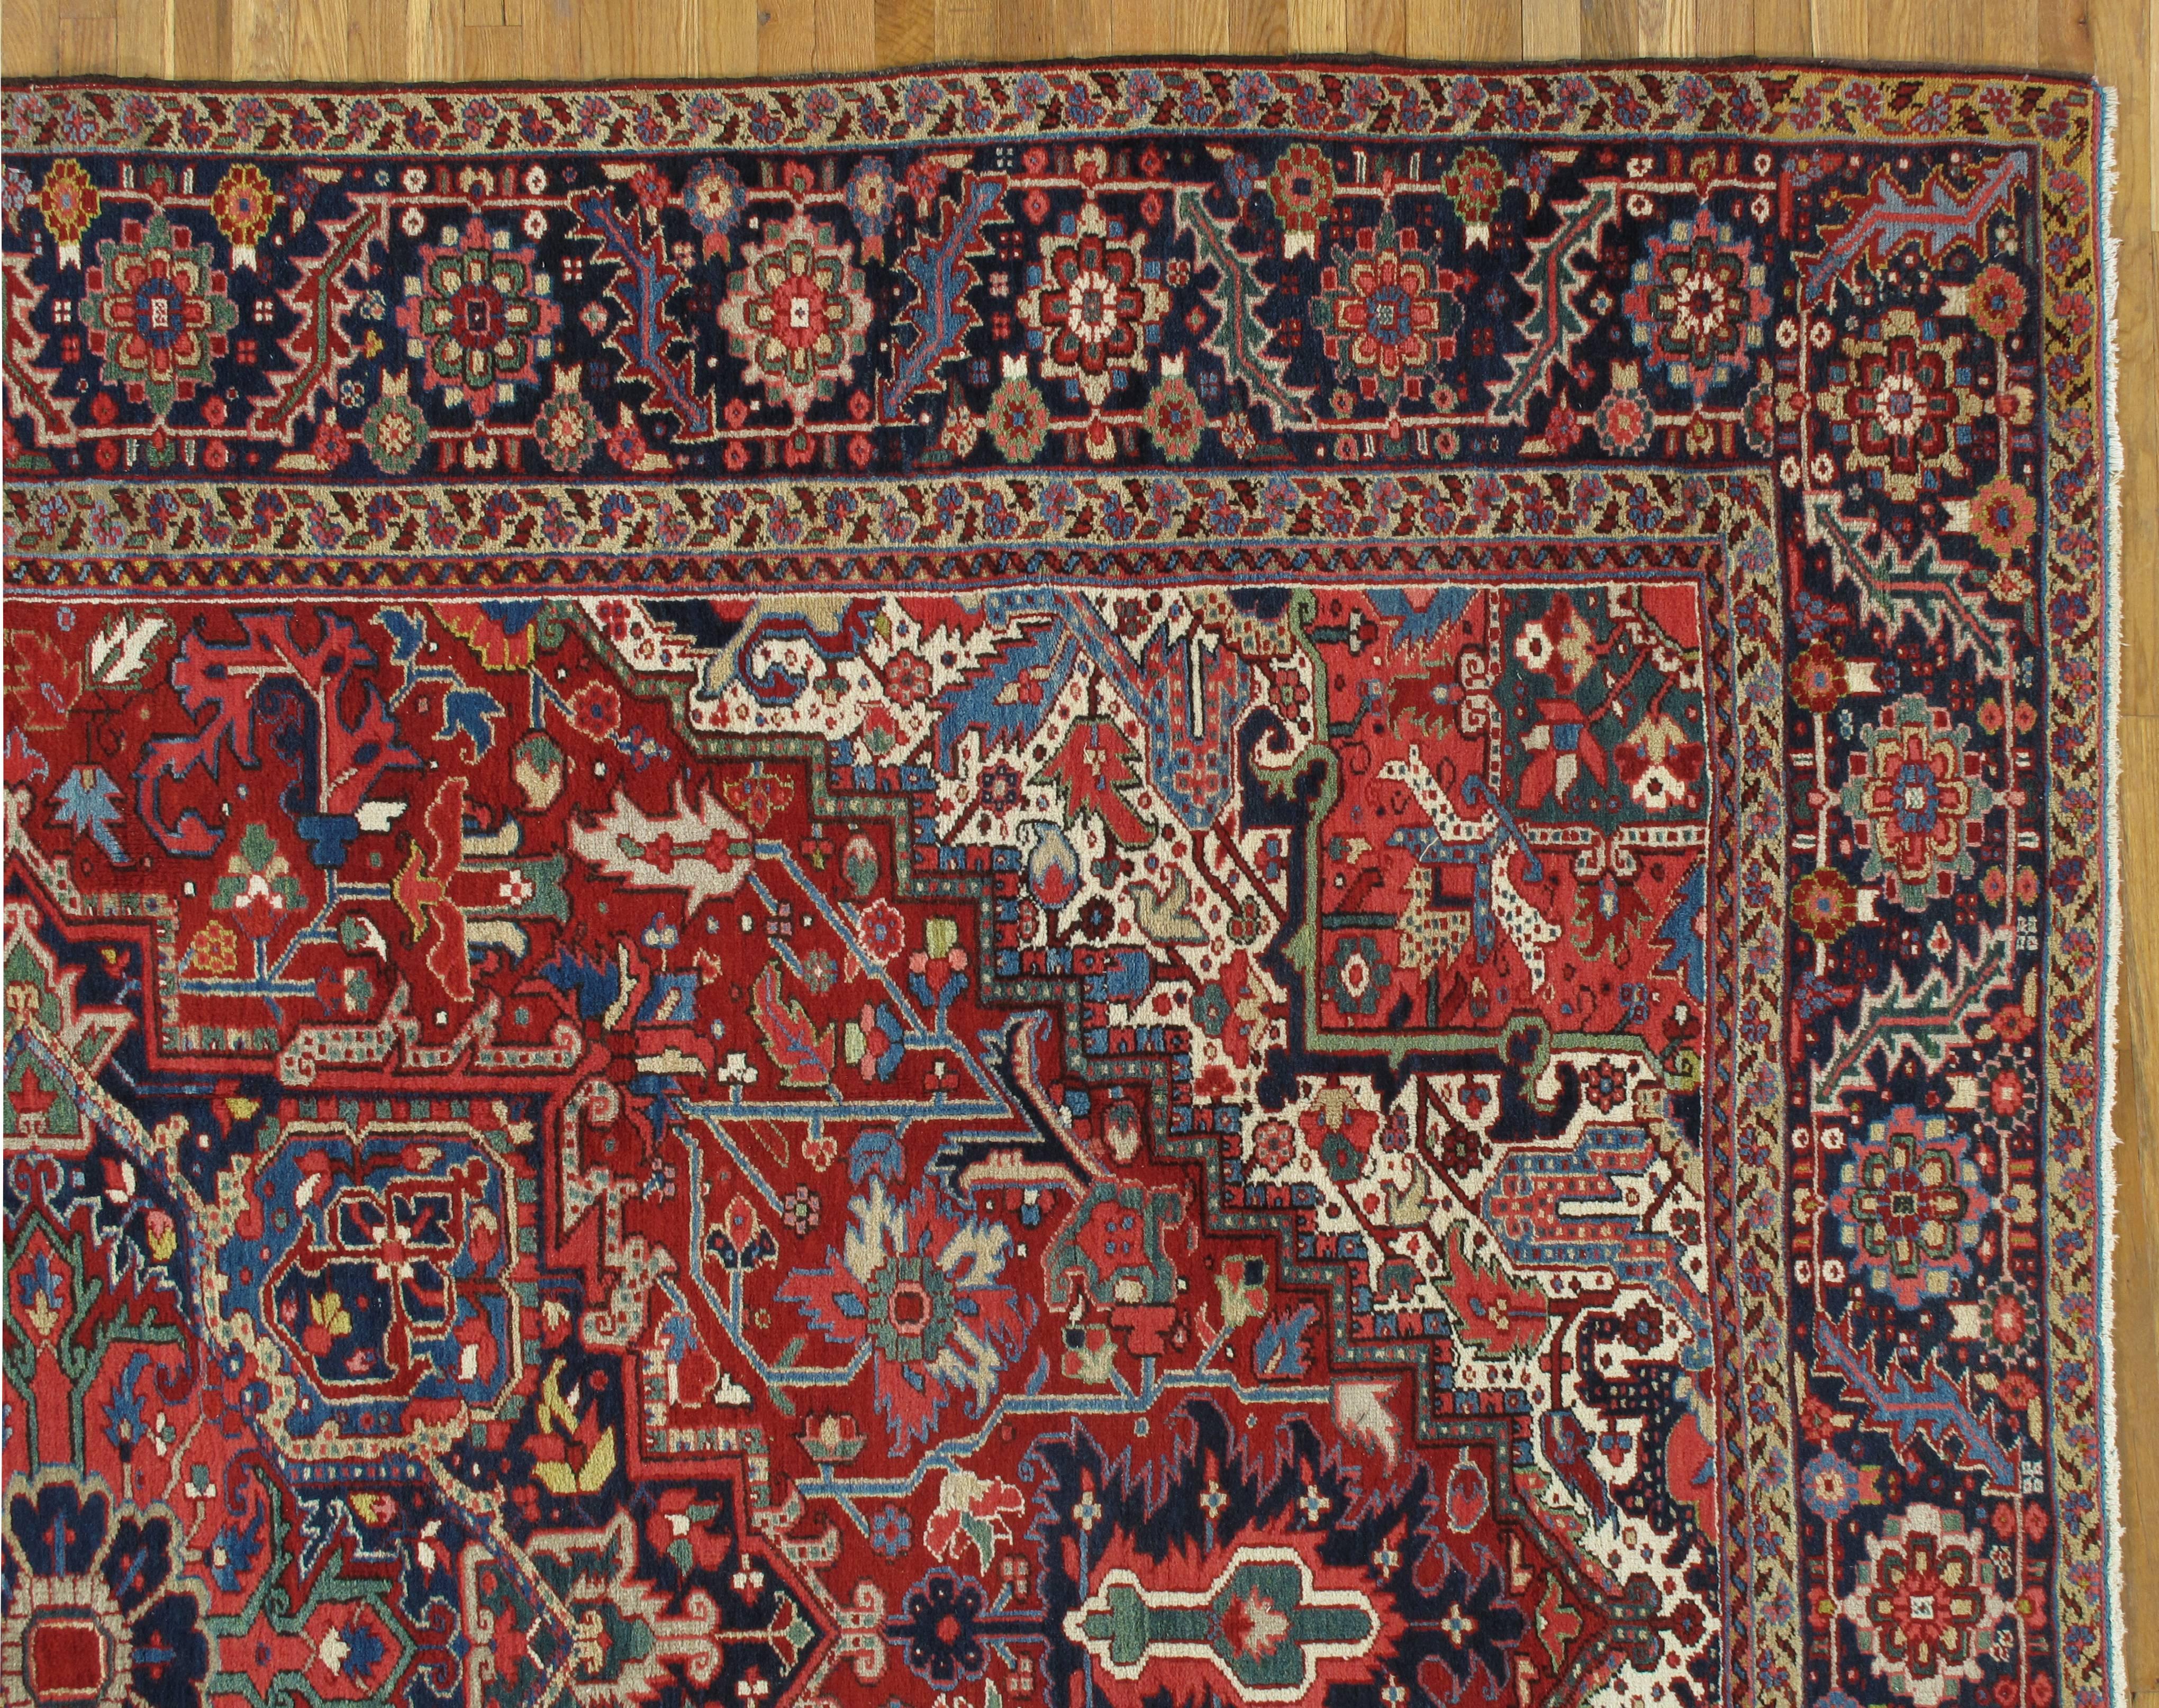 Heriz carpets are the staple of the furnishing market and remain the most popular of all NW Persian Carpets. They were produced for the rapidly growing US market in the late 19th to Early 20th Centuries. In home design, Heriz carpets are beloved for